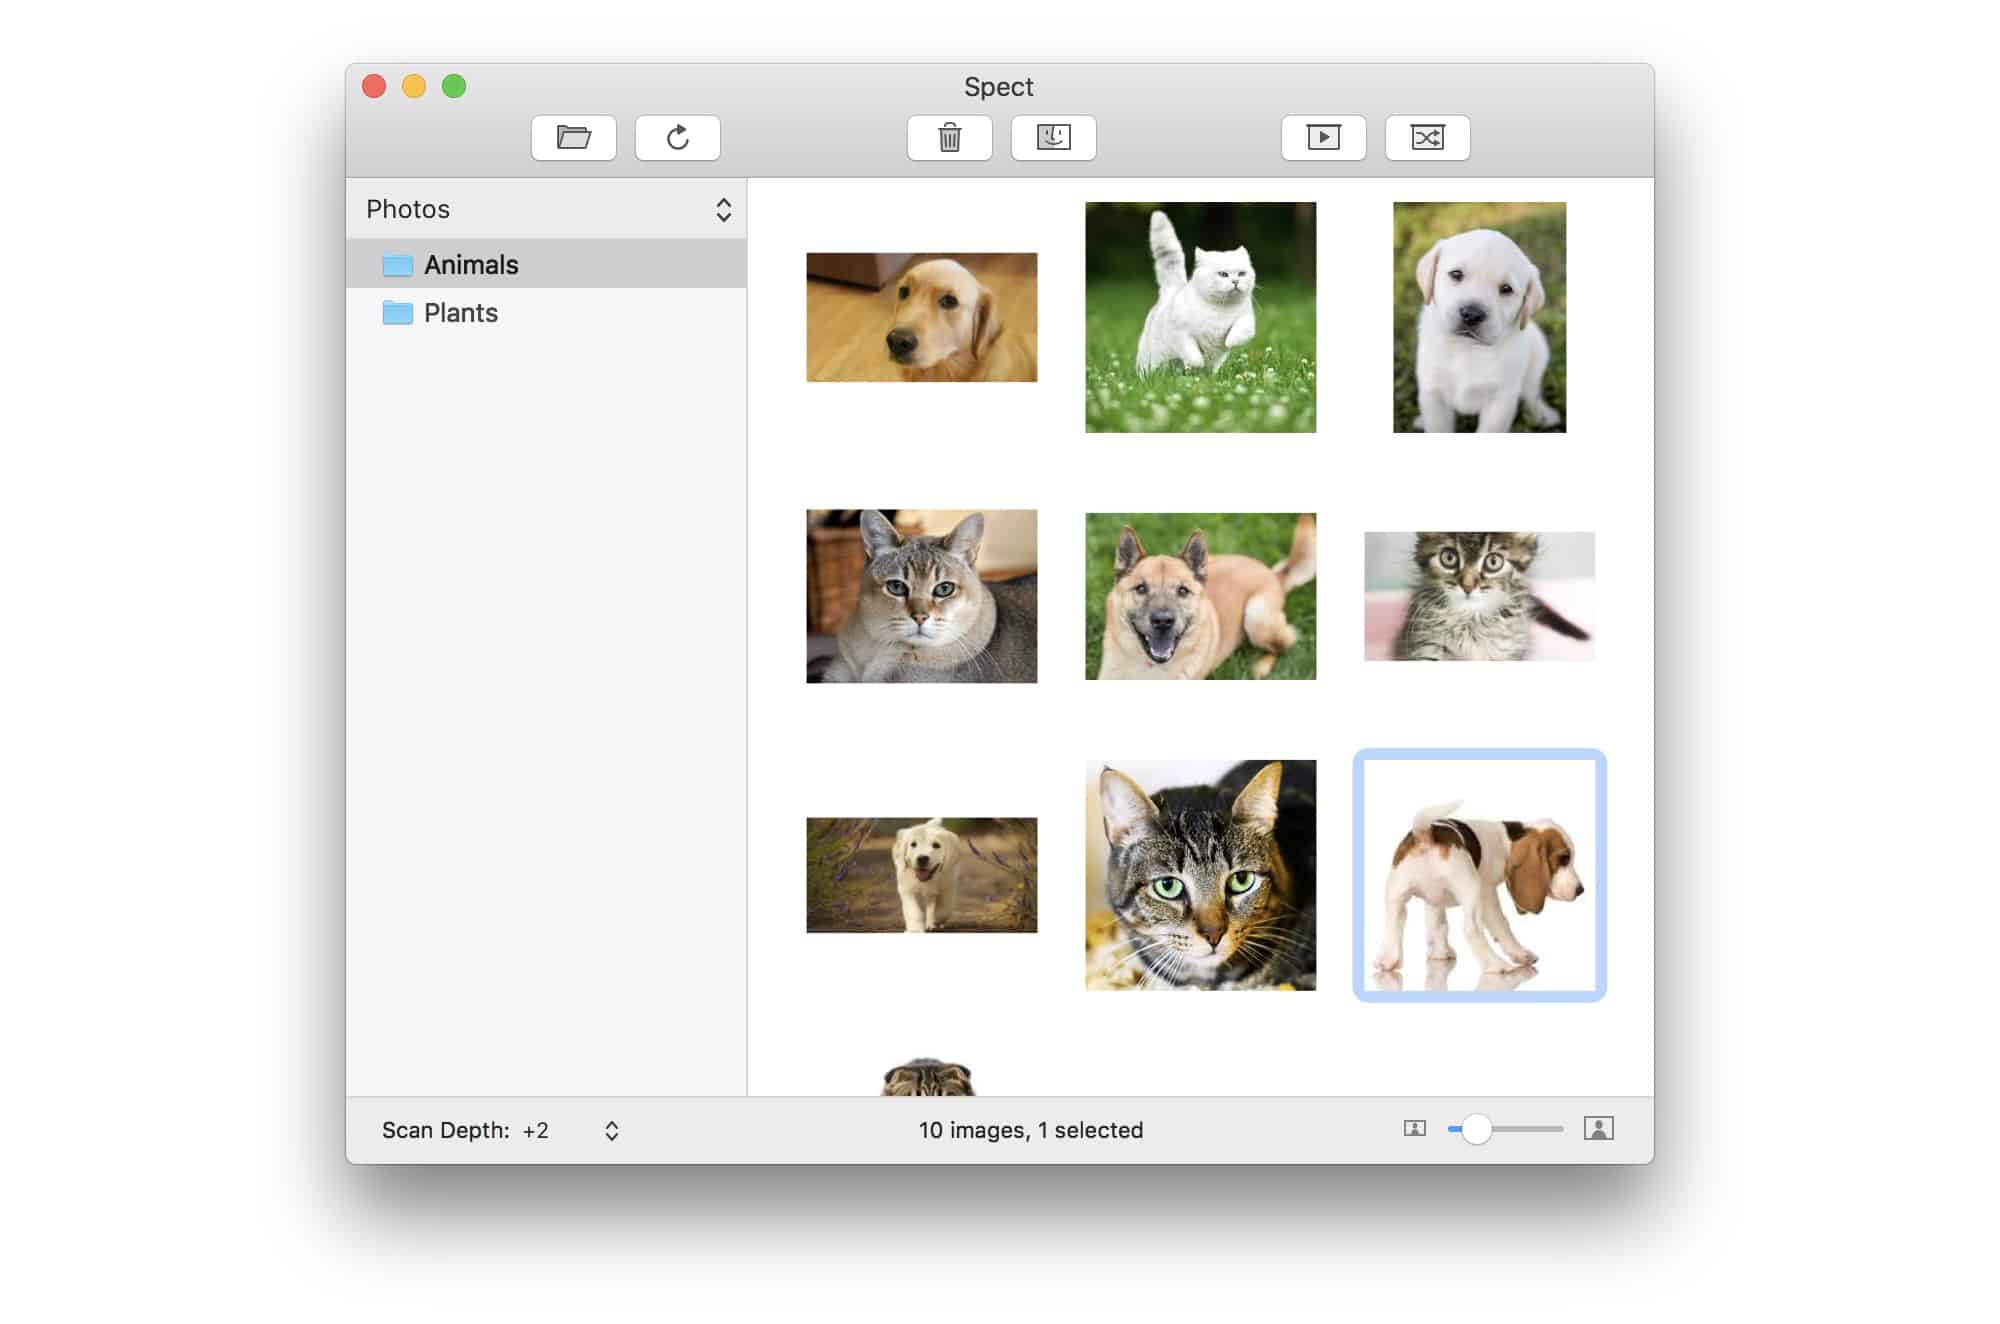 Spect is an ultra-light image browser from Panic founder Steven Frank.